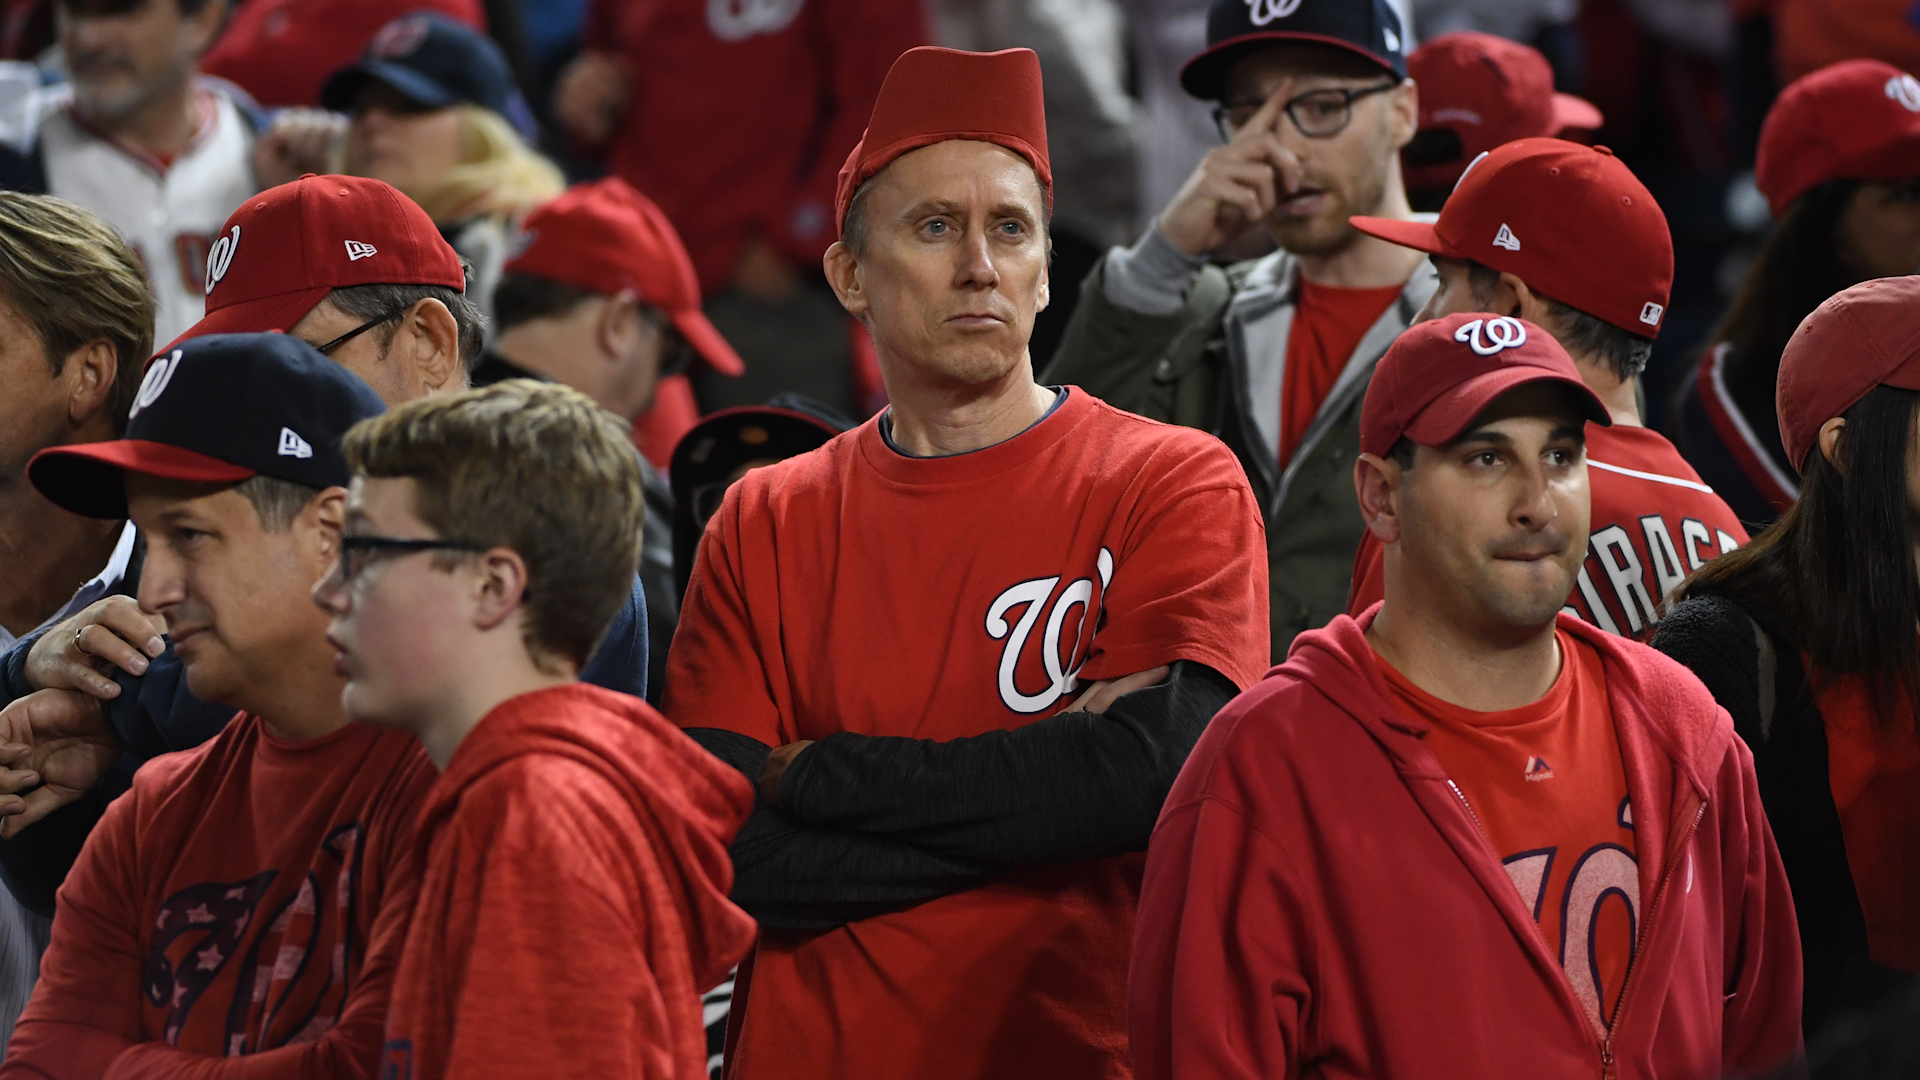 Nationals Fans React To Bryce Harper's Return To D.C. With Anger And  Artistry